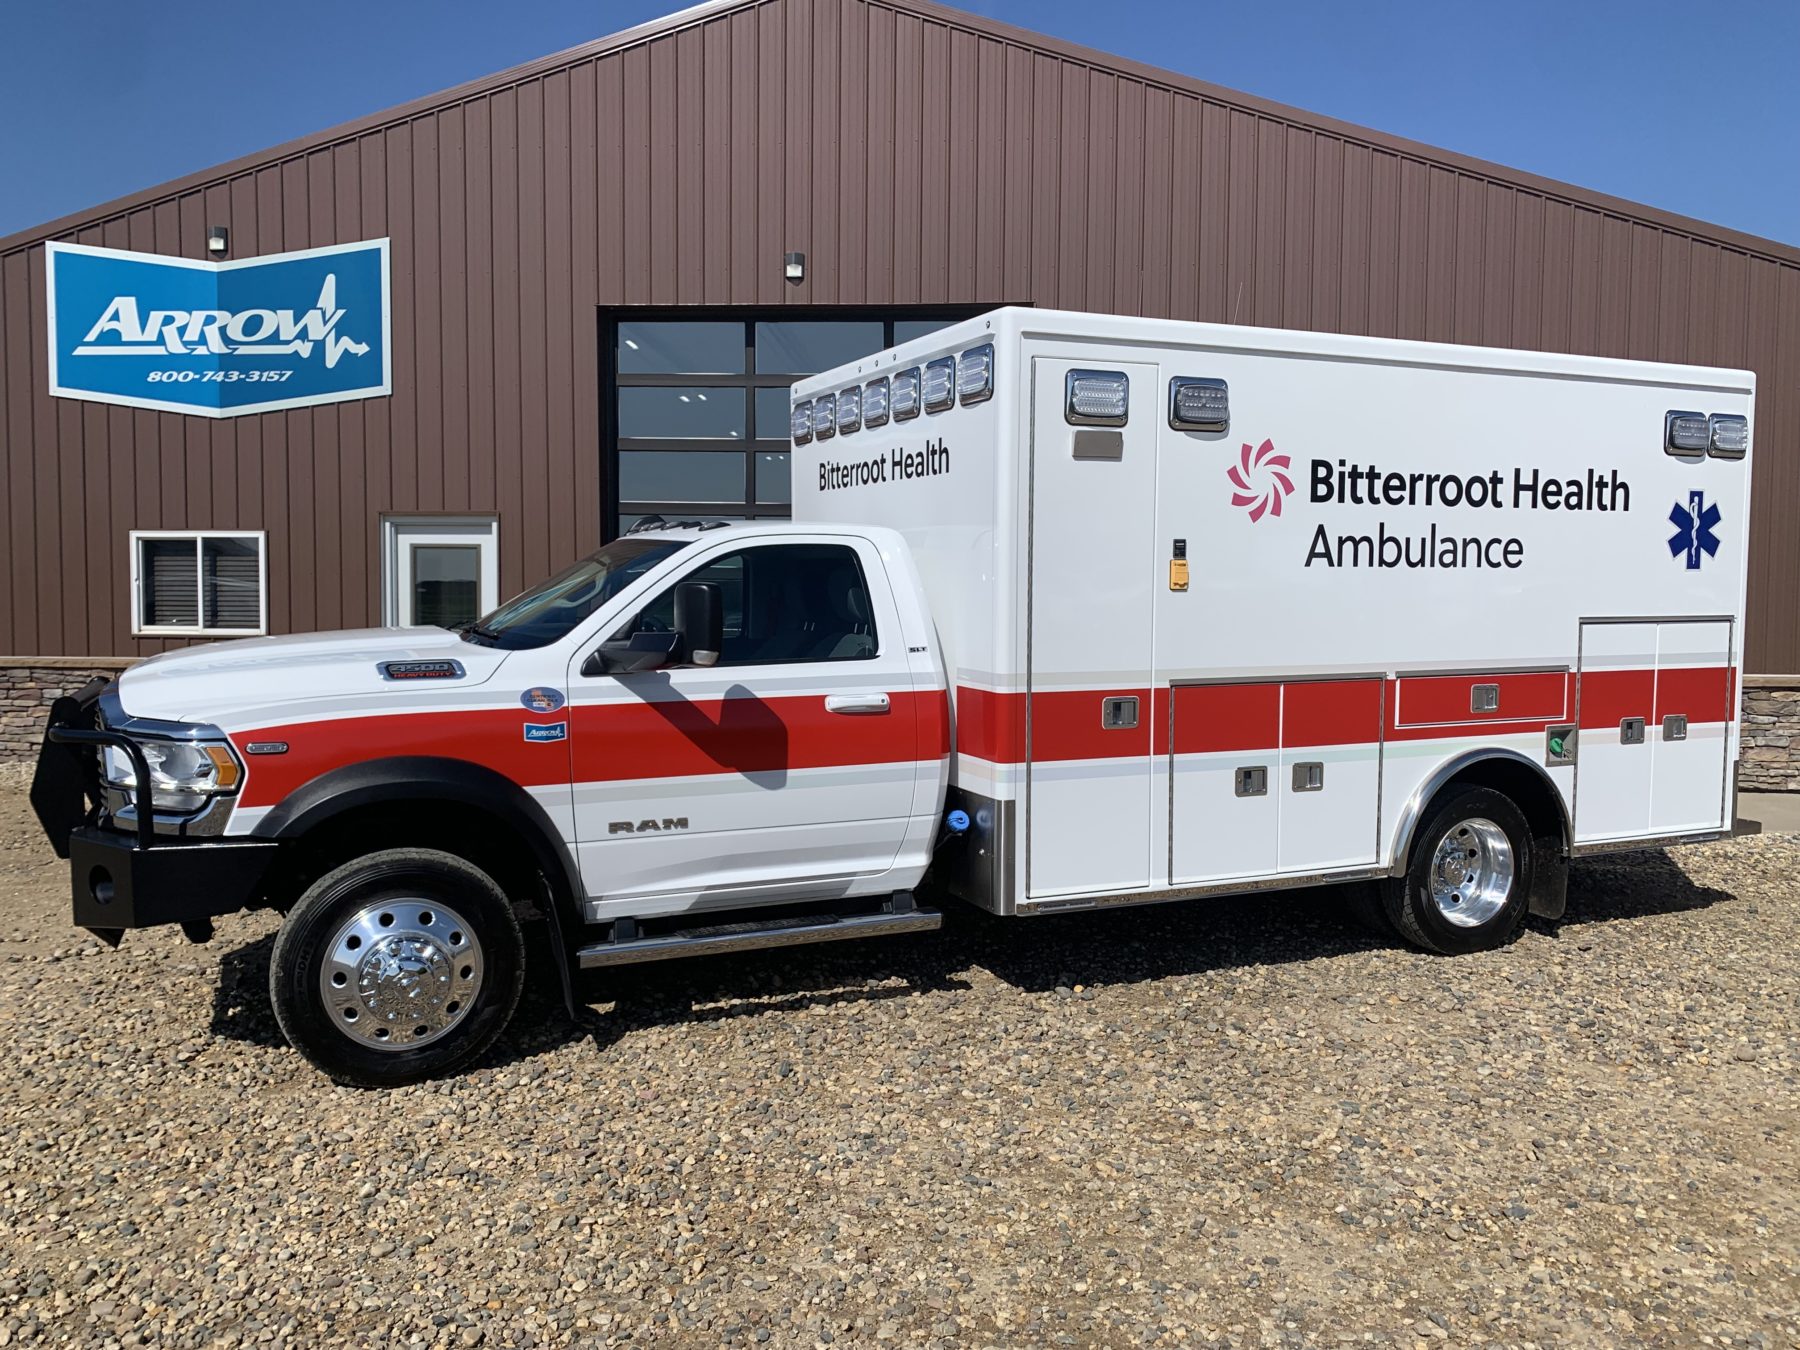 2020 Ram 4500 4x4 Heavy Duty Ambulance For Sale – Picture 3